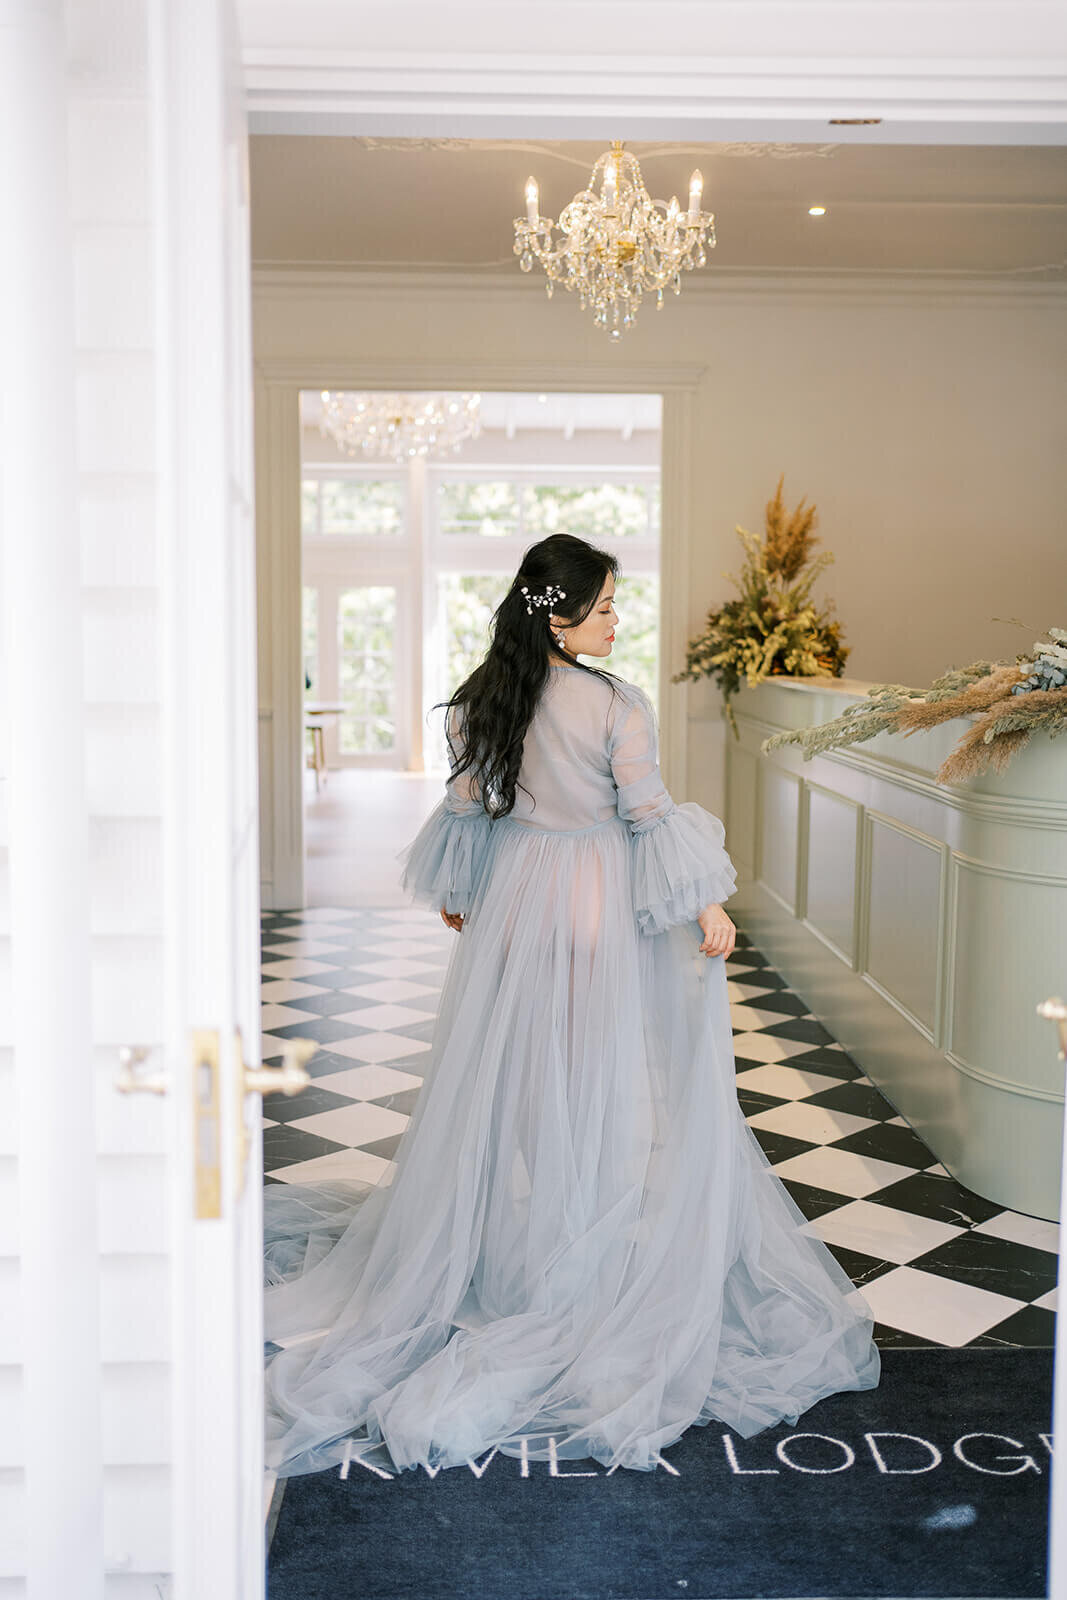 Embrace the beauty of pregnancy as a mum in a blue tulle gown captures stunning maternity moments at Gold Coast's Kwila Lodge.